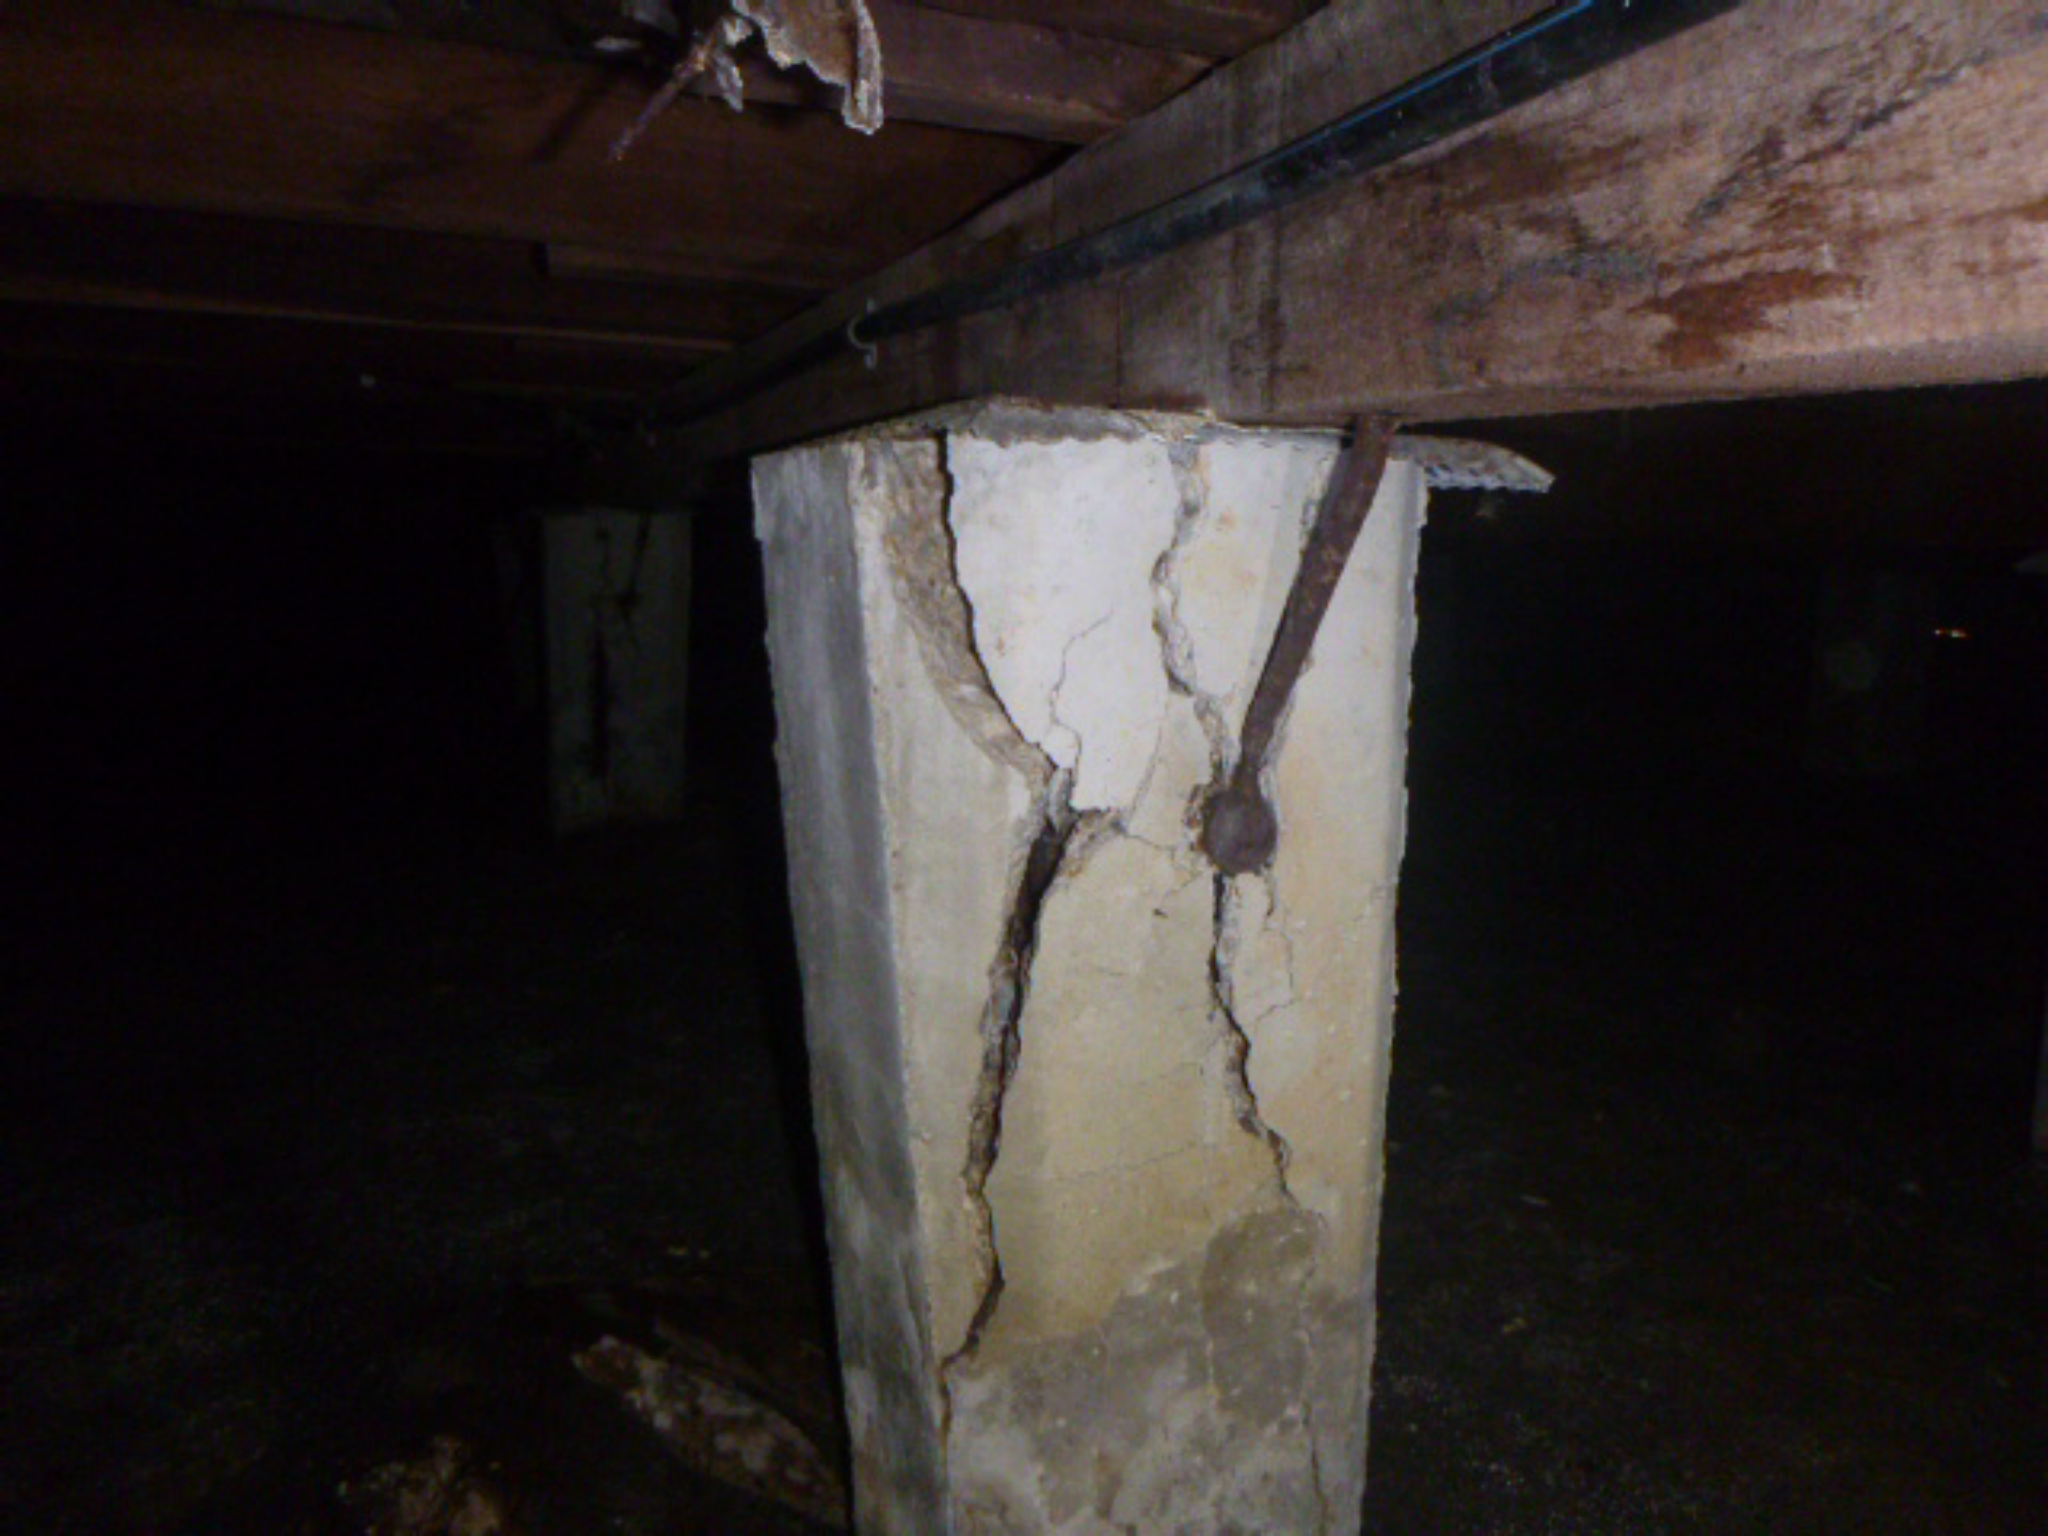 Concrete stumps are not immune to decay under extreme conditions.